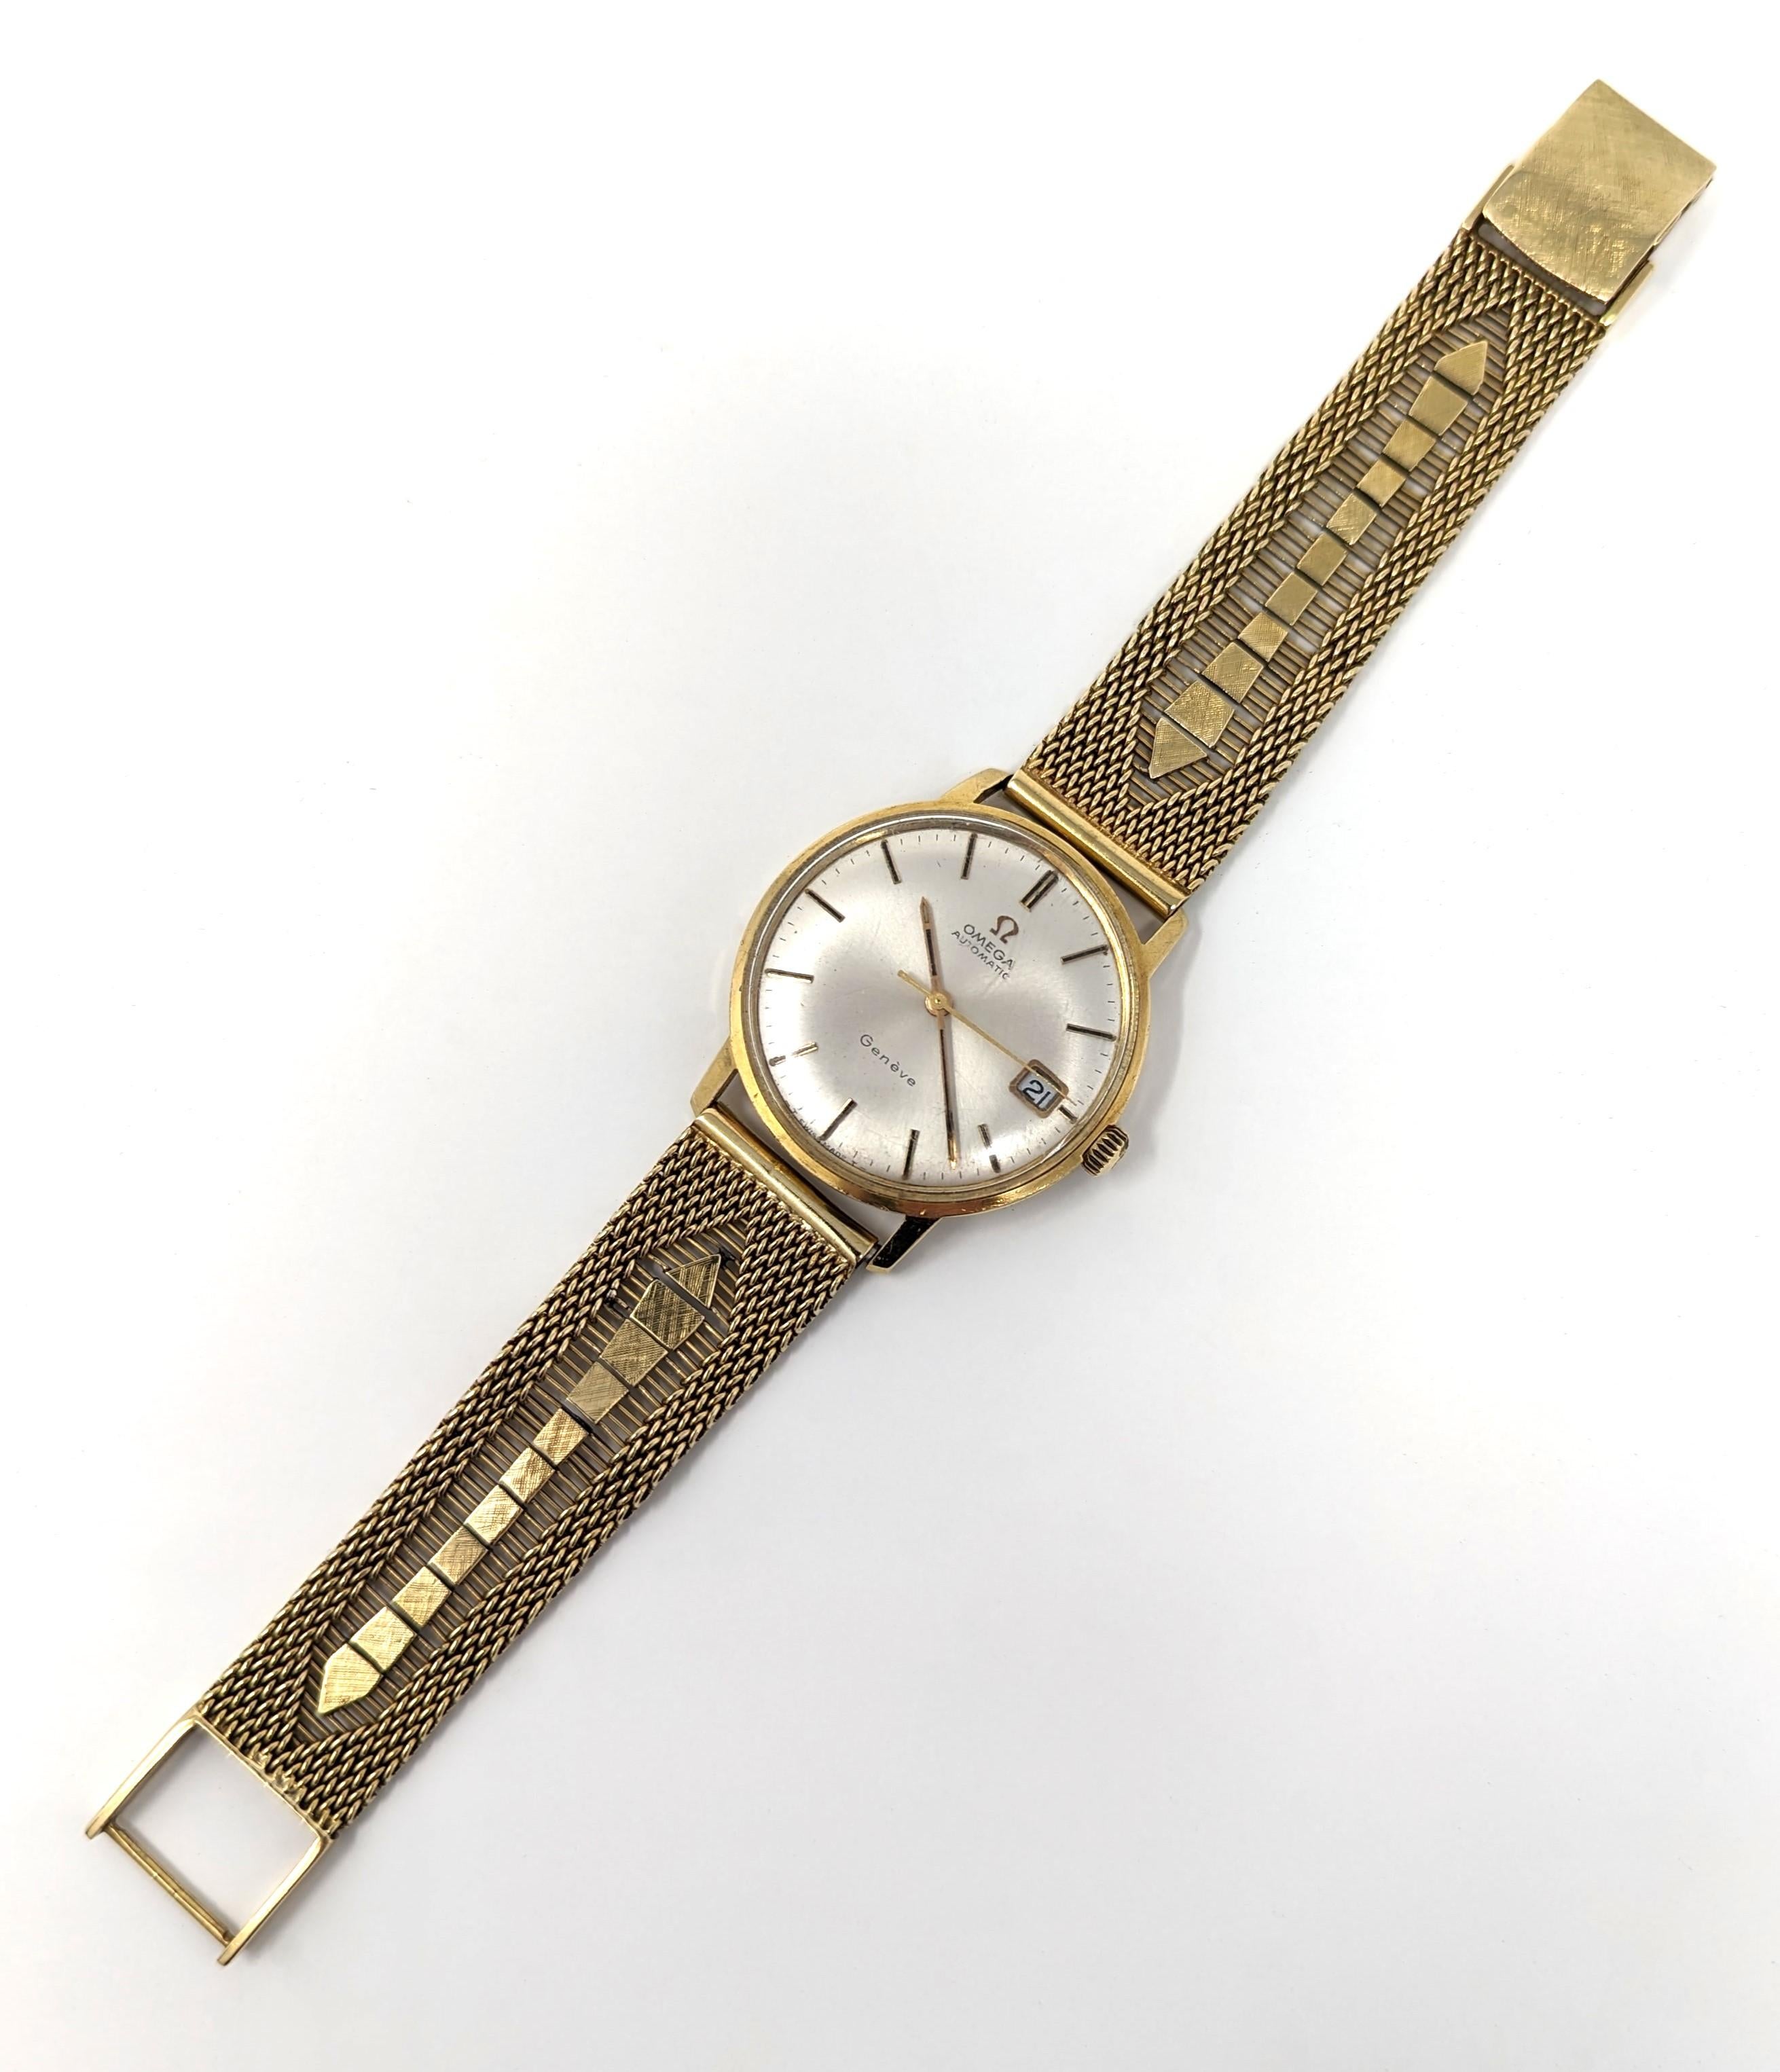 Superb vintage Omega Automatic watch, Geneve Swiss Made with a stunning 18k solid yellow gold mesh band. The large face measures 1.3 inches in diameter (including the bezel) by 10mm in depth. Measures a total of 7.5 inches from one end to the other,